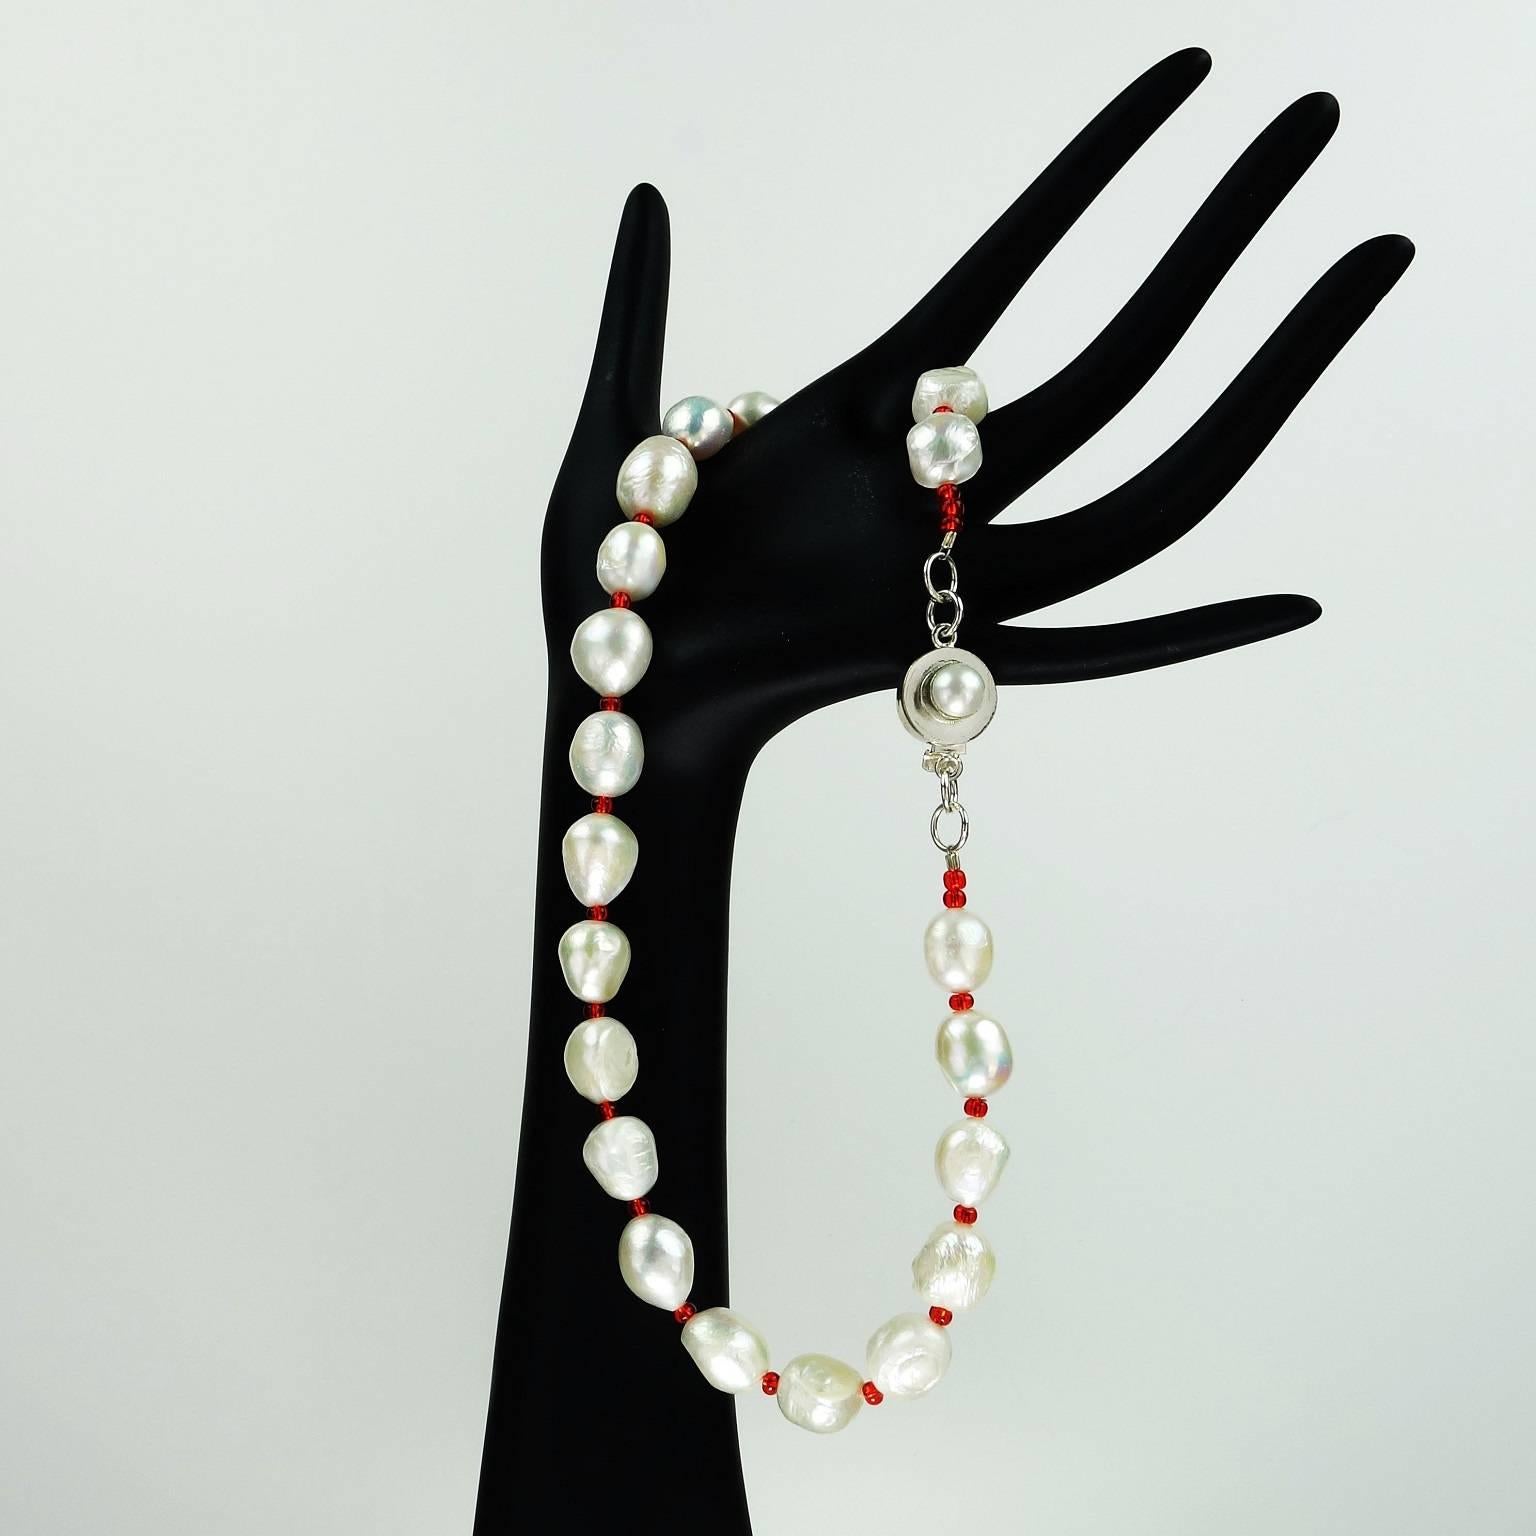 Lovely White Freshwater Pearl Necklace with Red Czech bead accents. This choker length (17.5in) necklace has a complementary silver tone clasp with a pearl nestled in it. Wonderful and fresh for all seasons, but looking great for the approaching